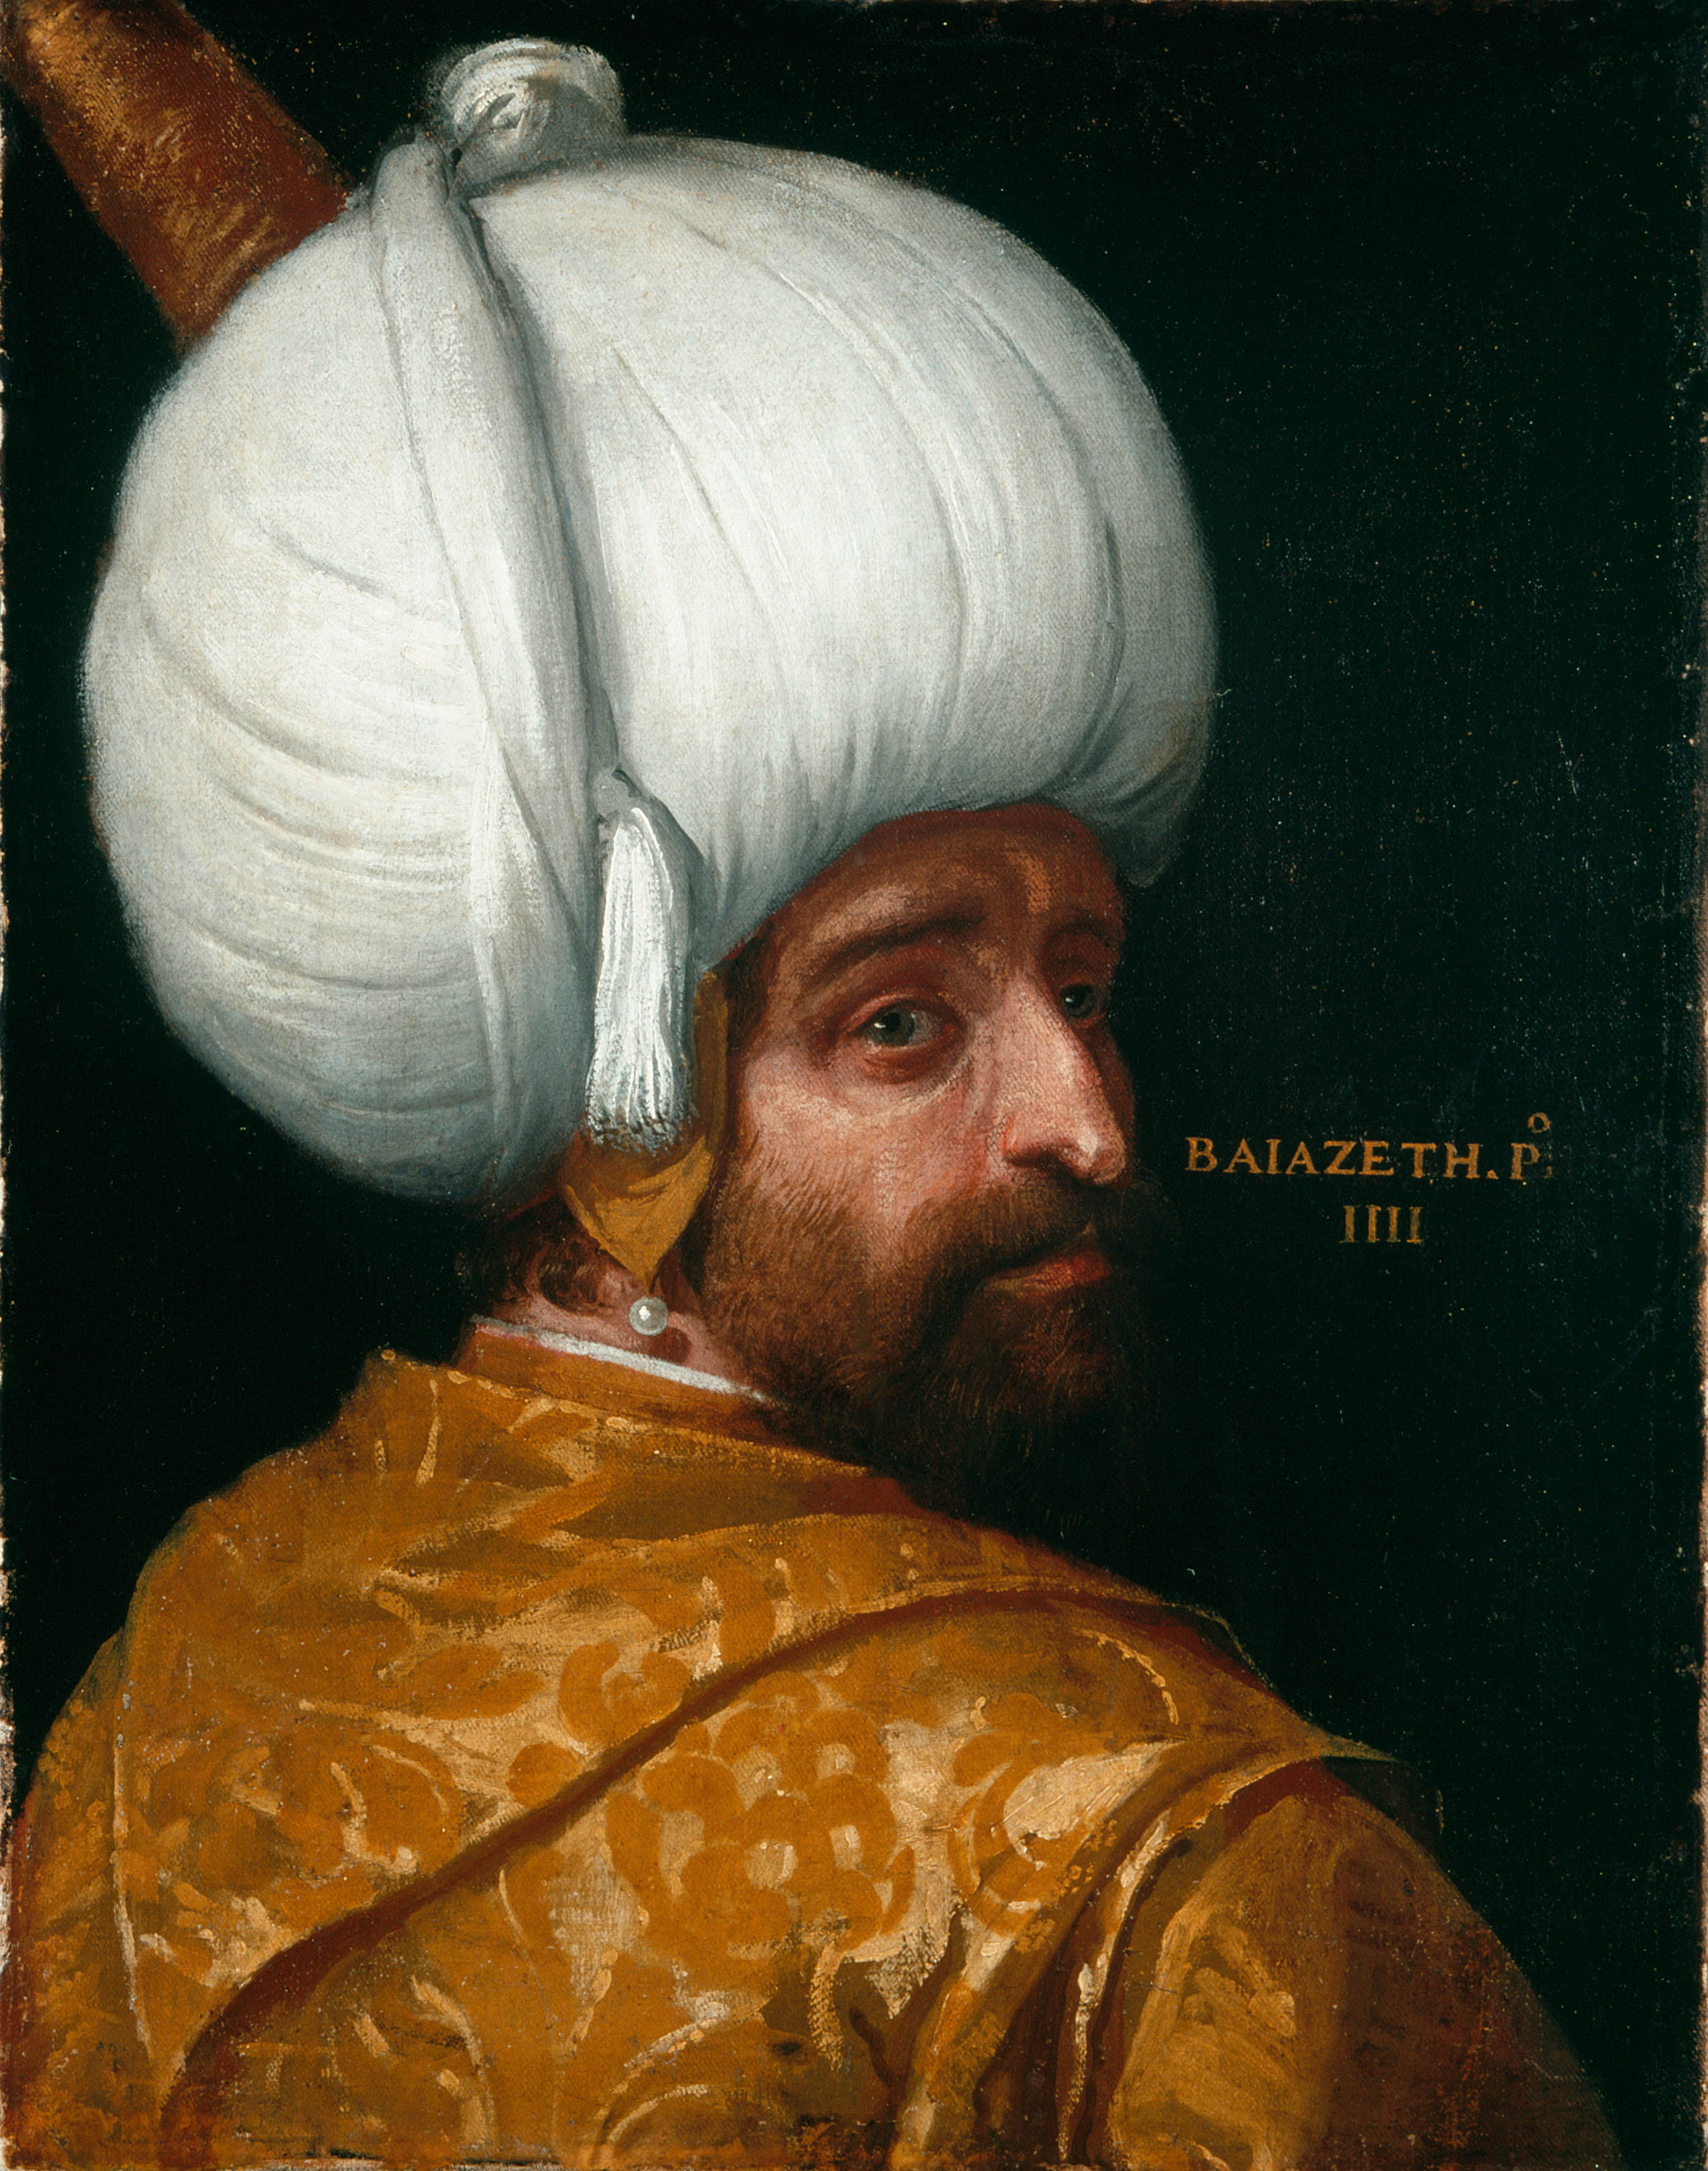 Sultan Bajezid I by Paolo Veronese (and workshop) - c. 1575 - 68,5 x 54 cm National Museum in Krakow